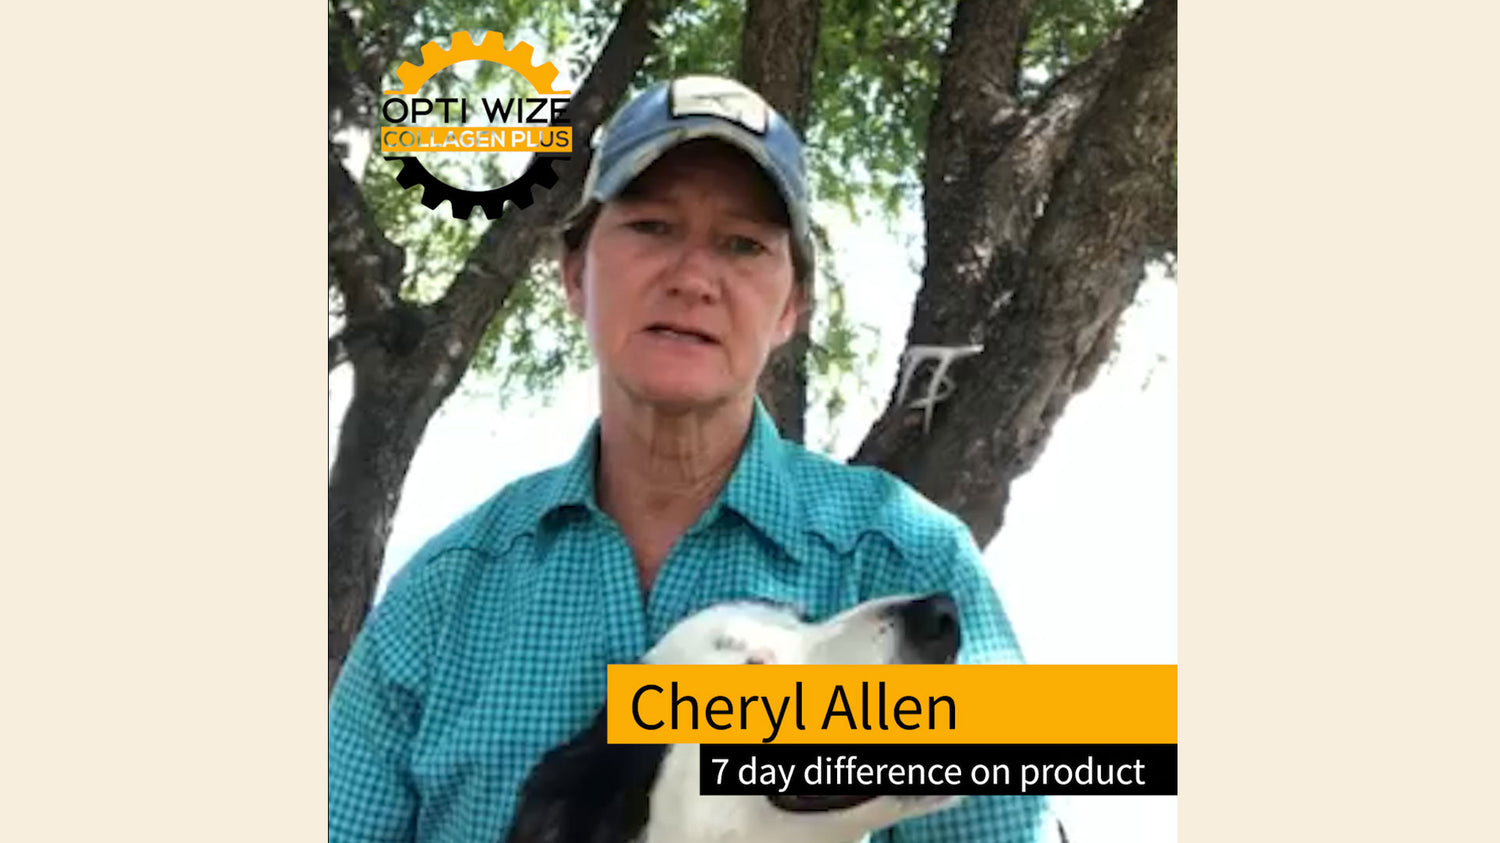 <p>Coccidioidomycosis can vary painful depending on whether your dog has a mild or severe infection. Arthritic flare ups and cartilage breakdown is the progression of the disease. Cheryl sees the astounding changes in her dog. Please have a listen to her story.</p>